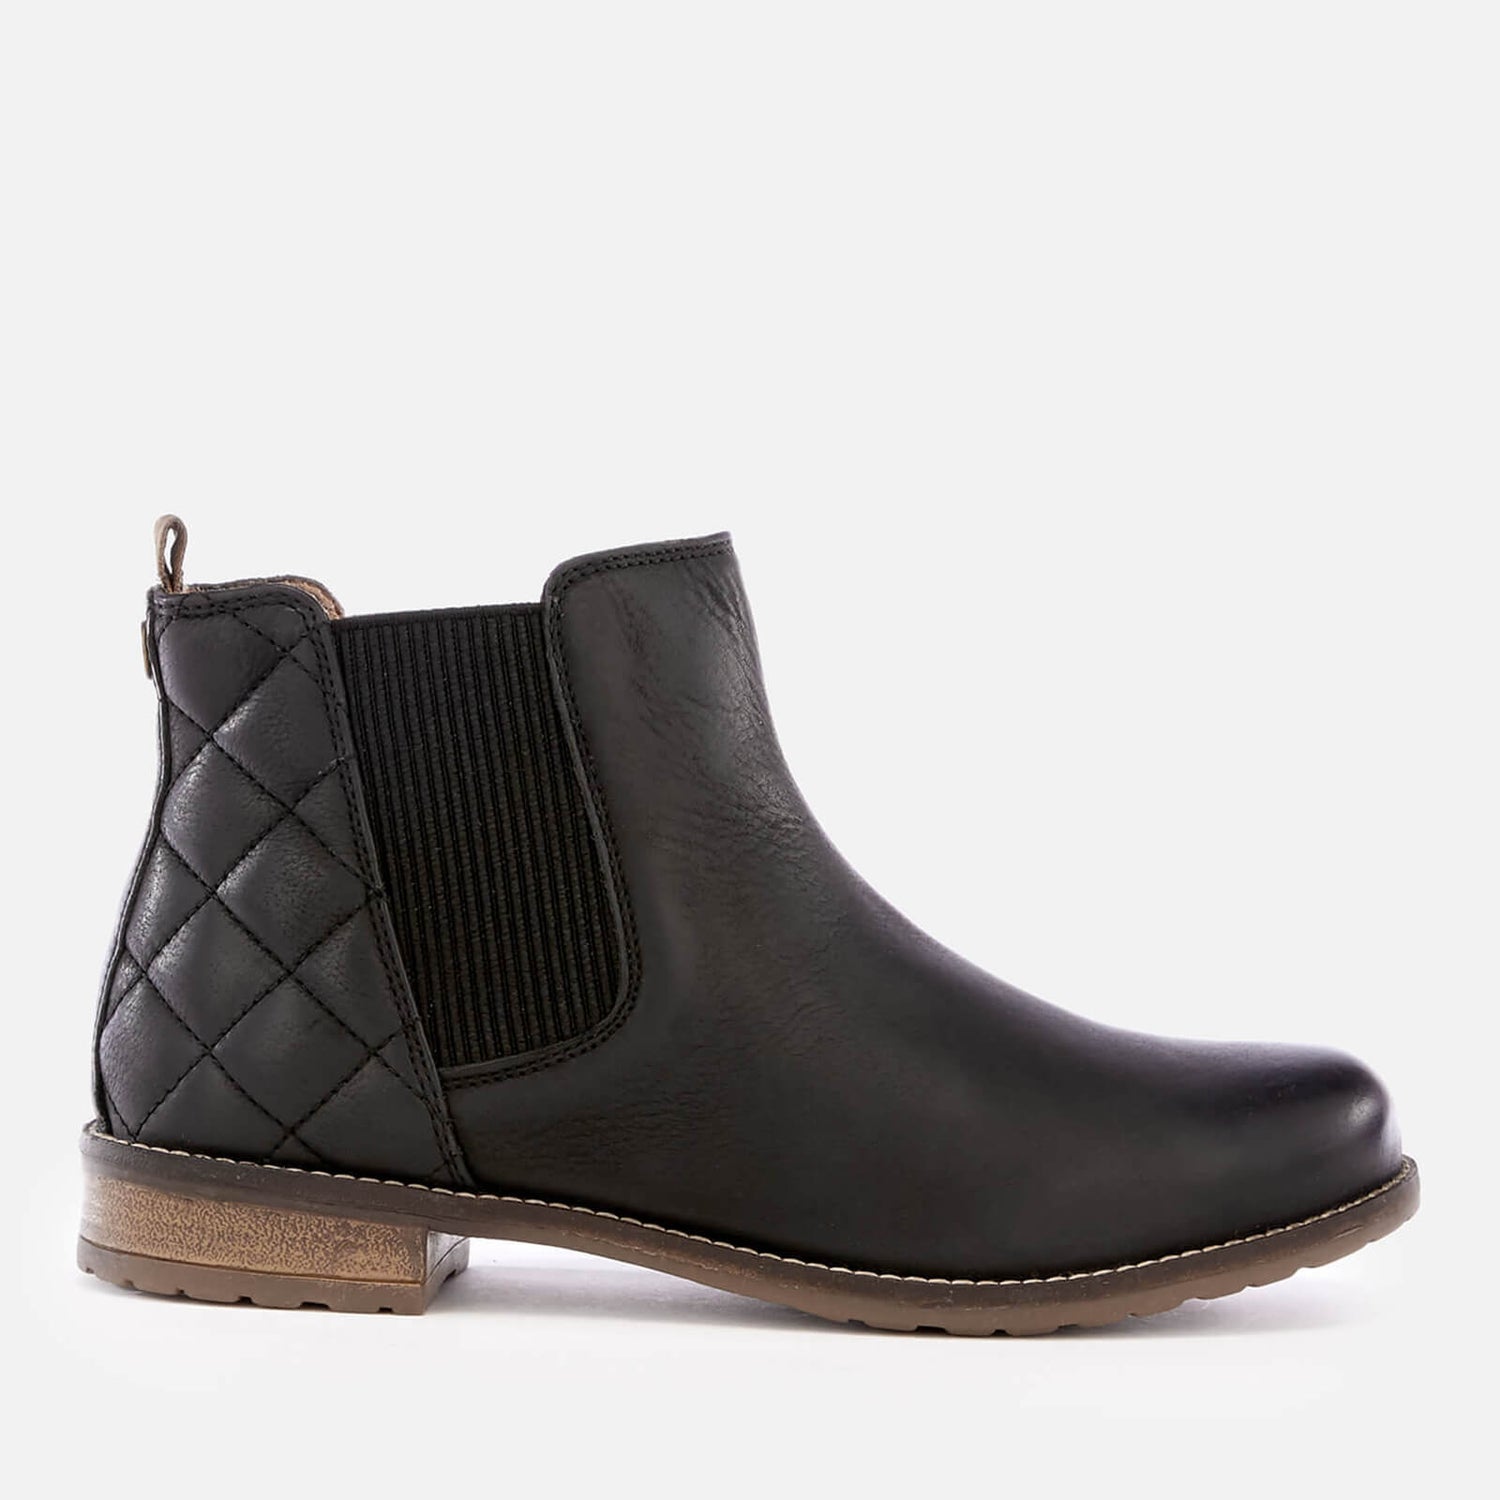 Barbour Women's Abigail Leather Quilted Chelsea Boots - Black - UK 3